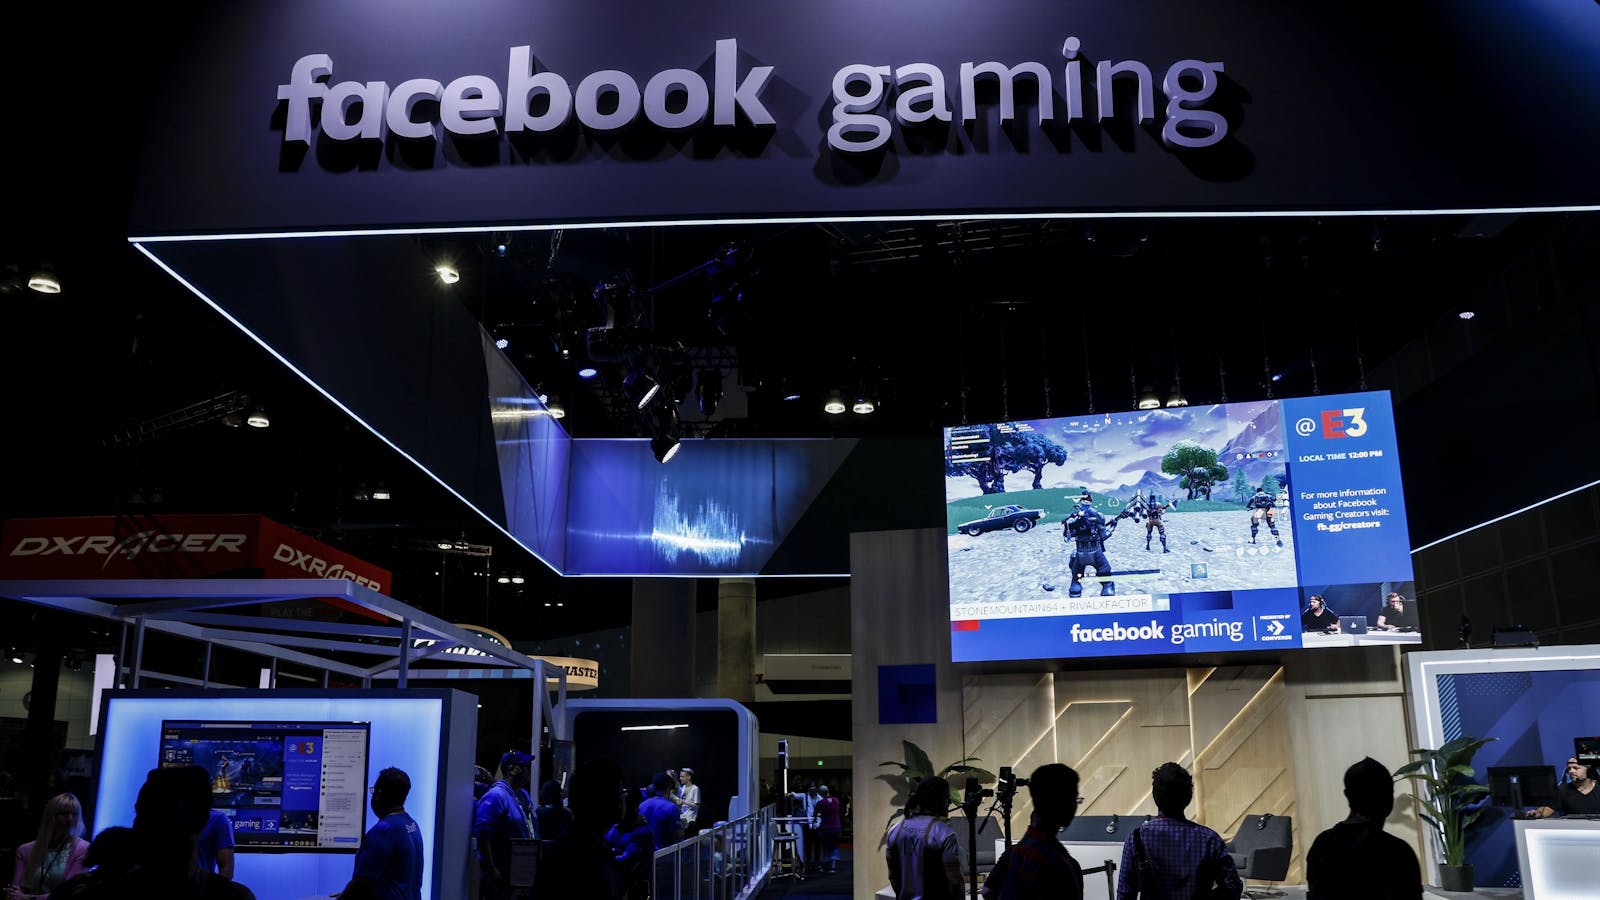 Attendees watching a video game streamed at Facebook Gaming's booth during the 2018 Entertainment Expo show in Los Angeles. Photo by Bloomberg